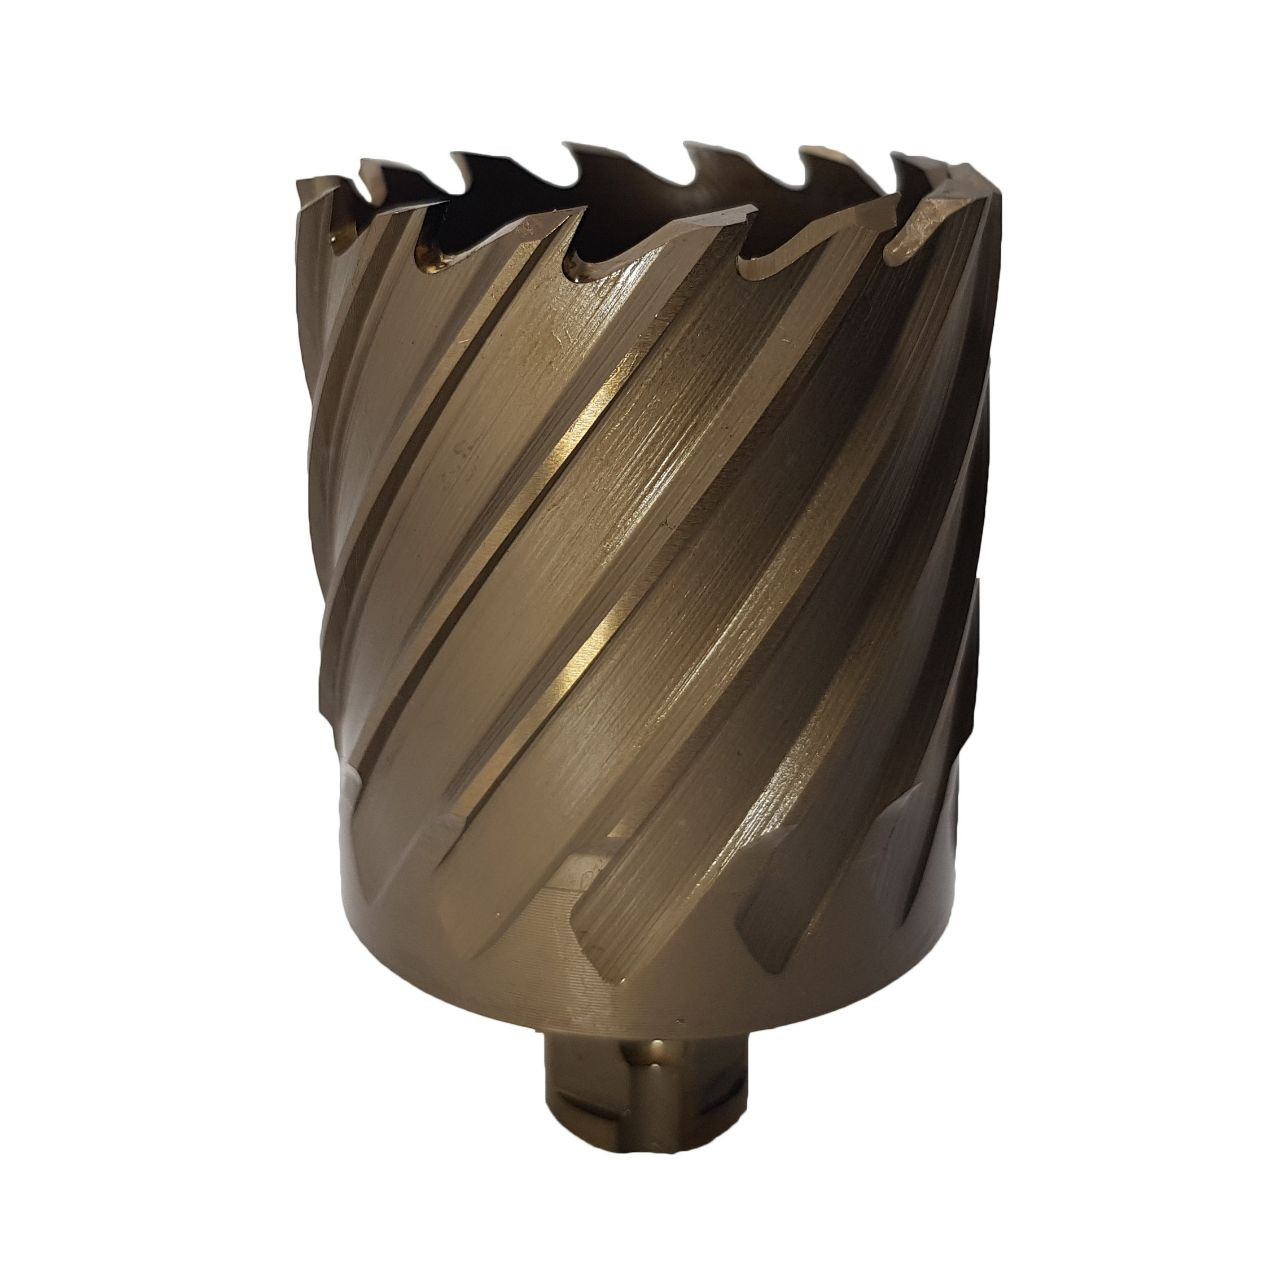 56 X 50 HSS-Co Excision Core Drill